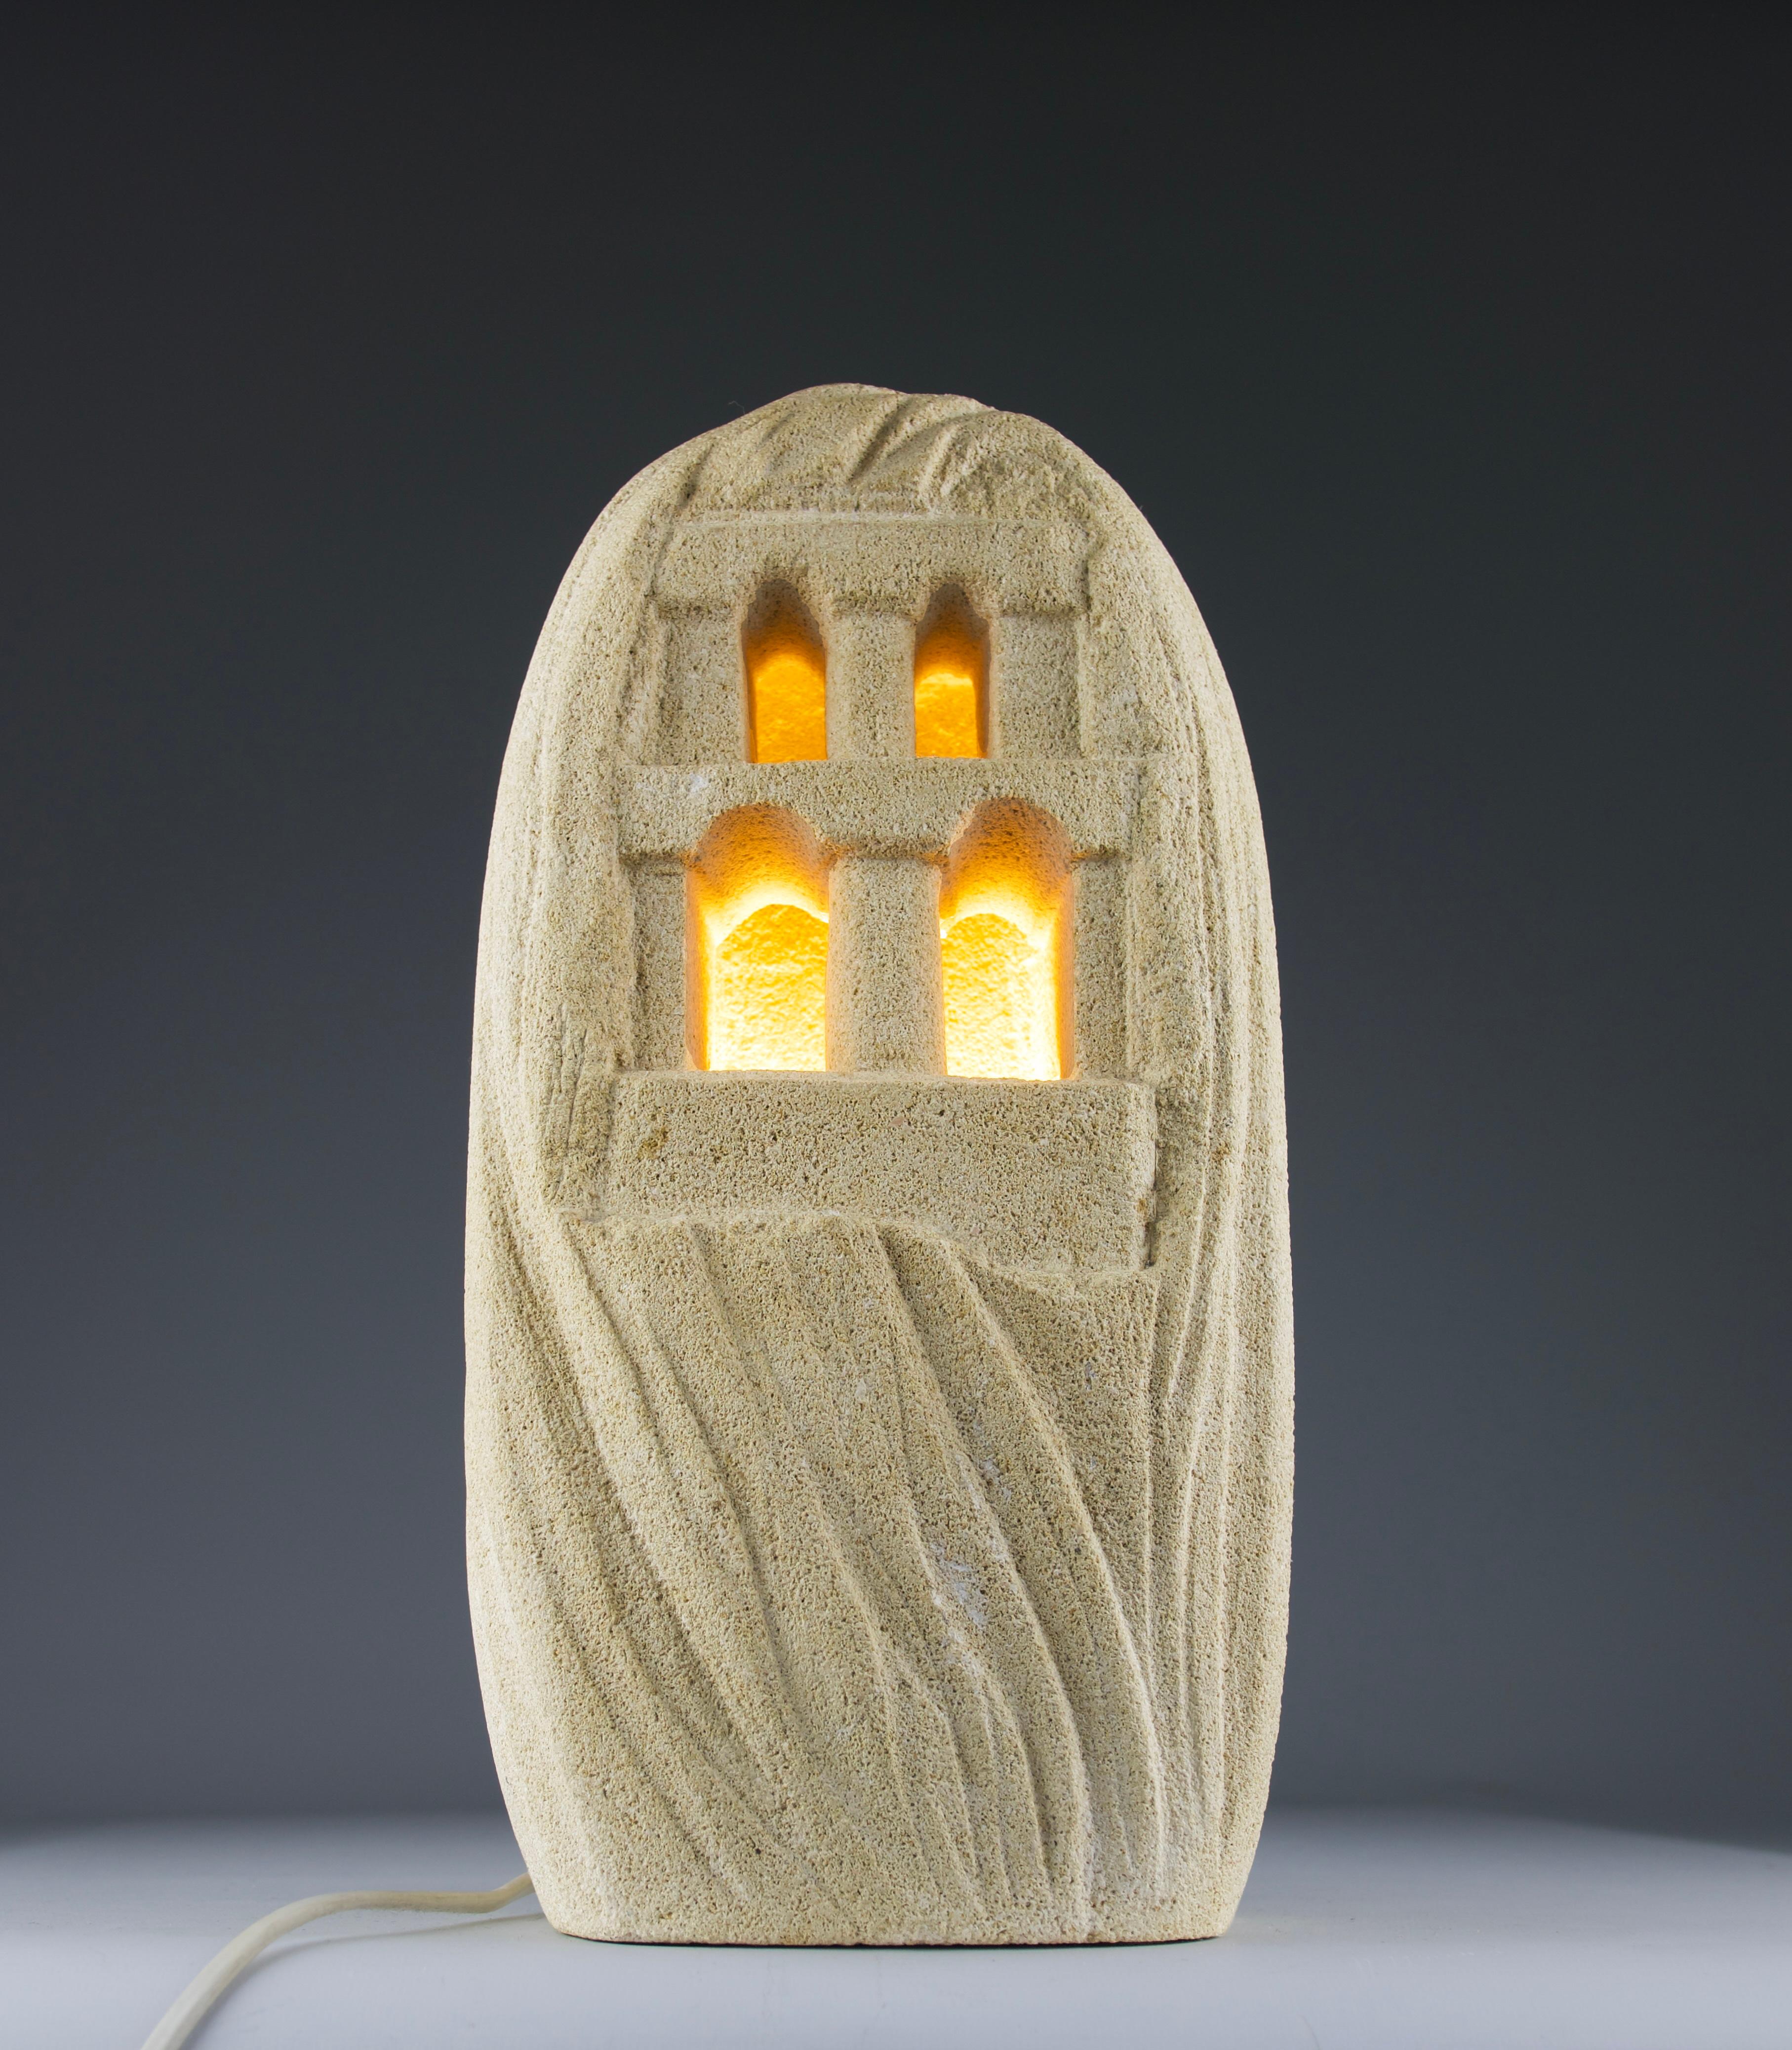 Beautiful Arsène Galisson sandstone lamp made in the 1970s. Decorated with carved architectural arches and lines enrobing the piece. The inside is slightly hollowed out to allow for a lightbulb to be placed.

In good condition.